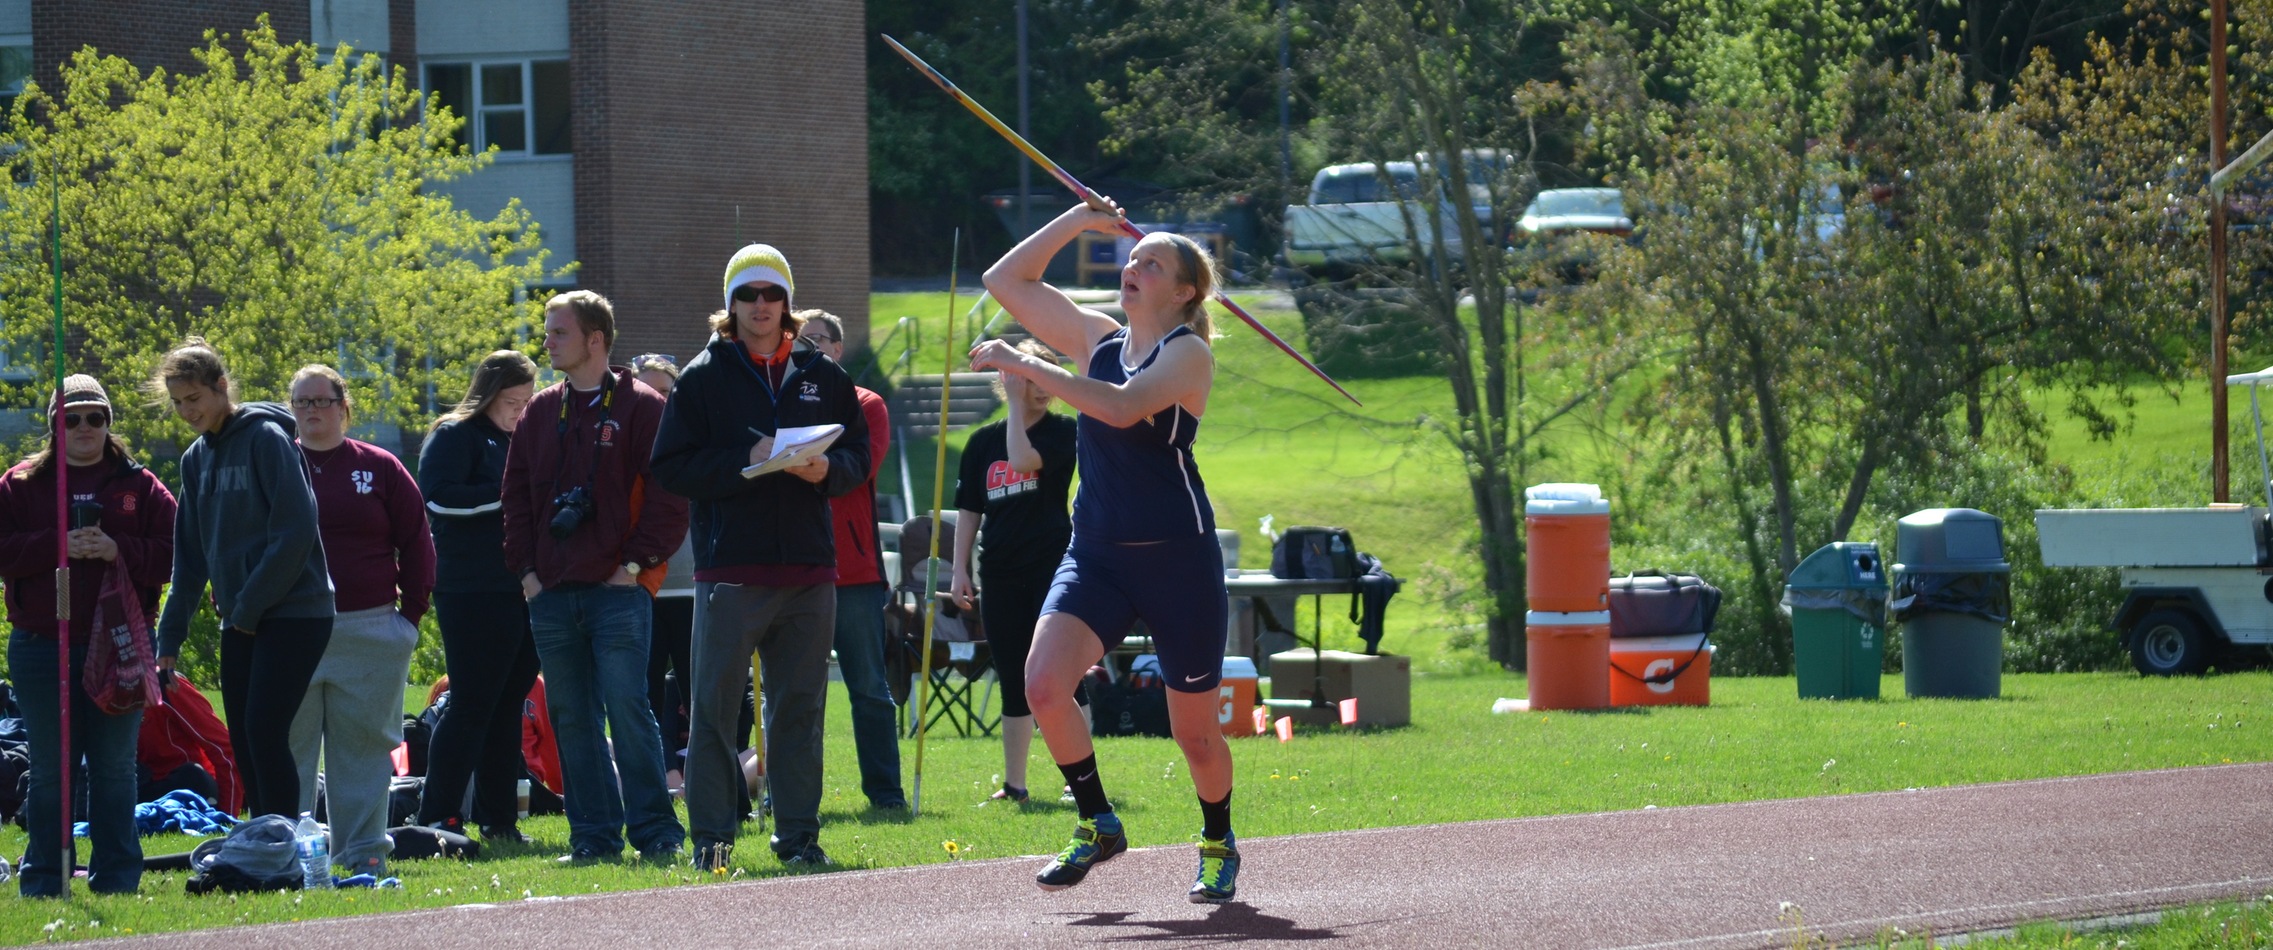 Women’s Track and Field Team Competes at Landmark Championships